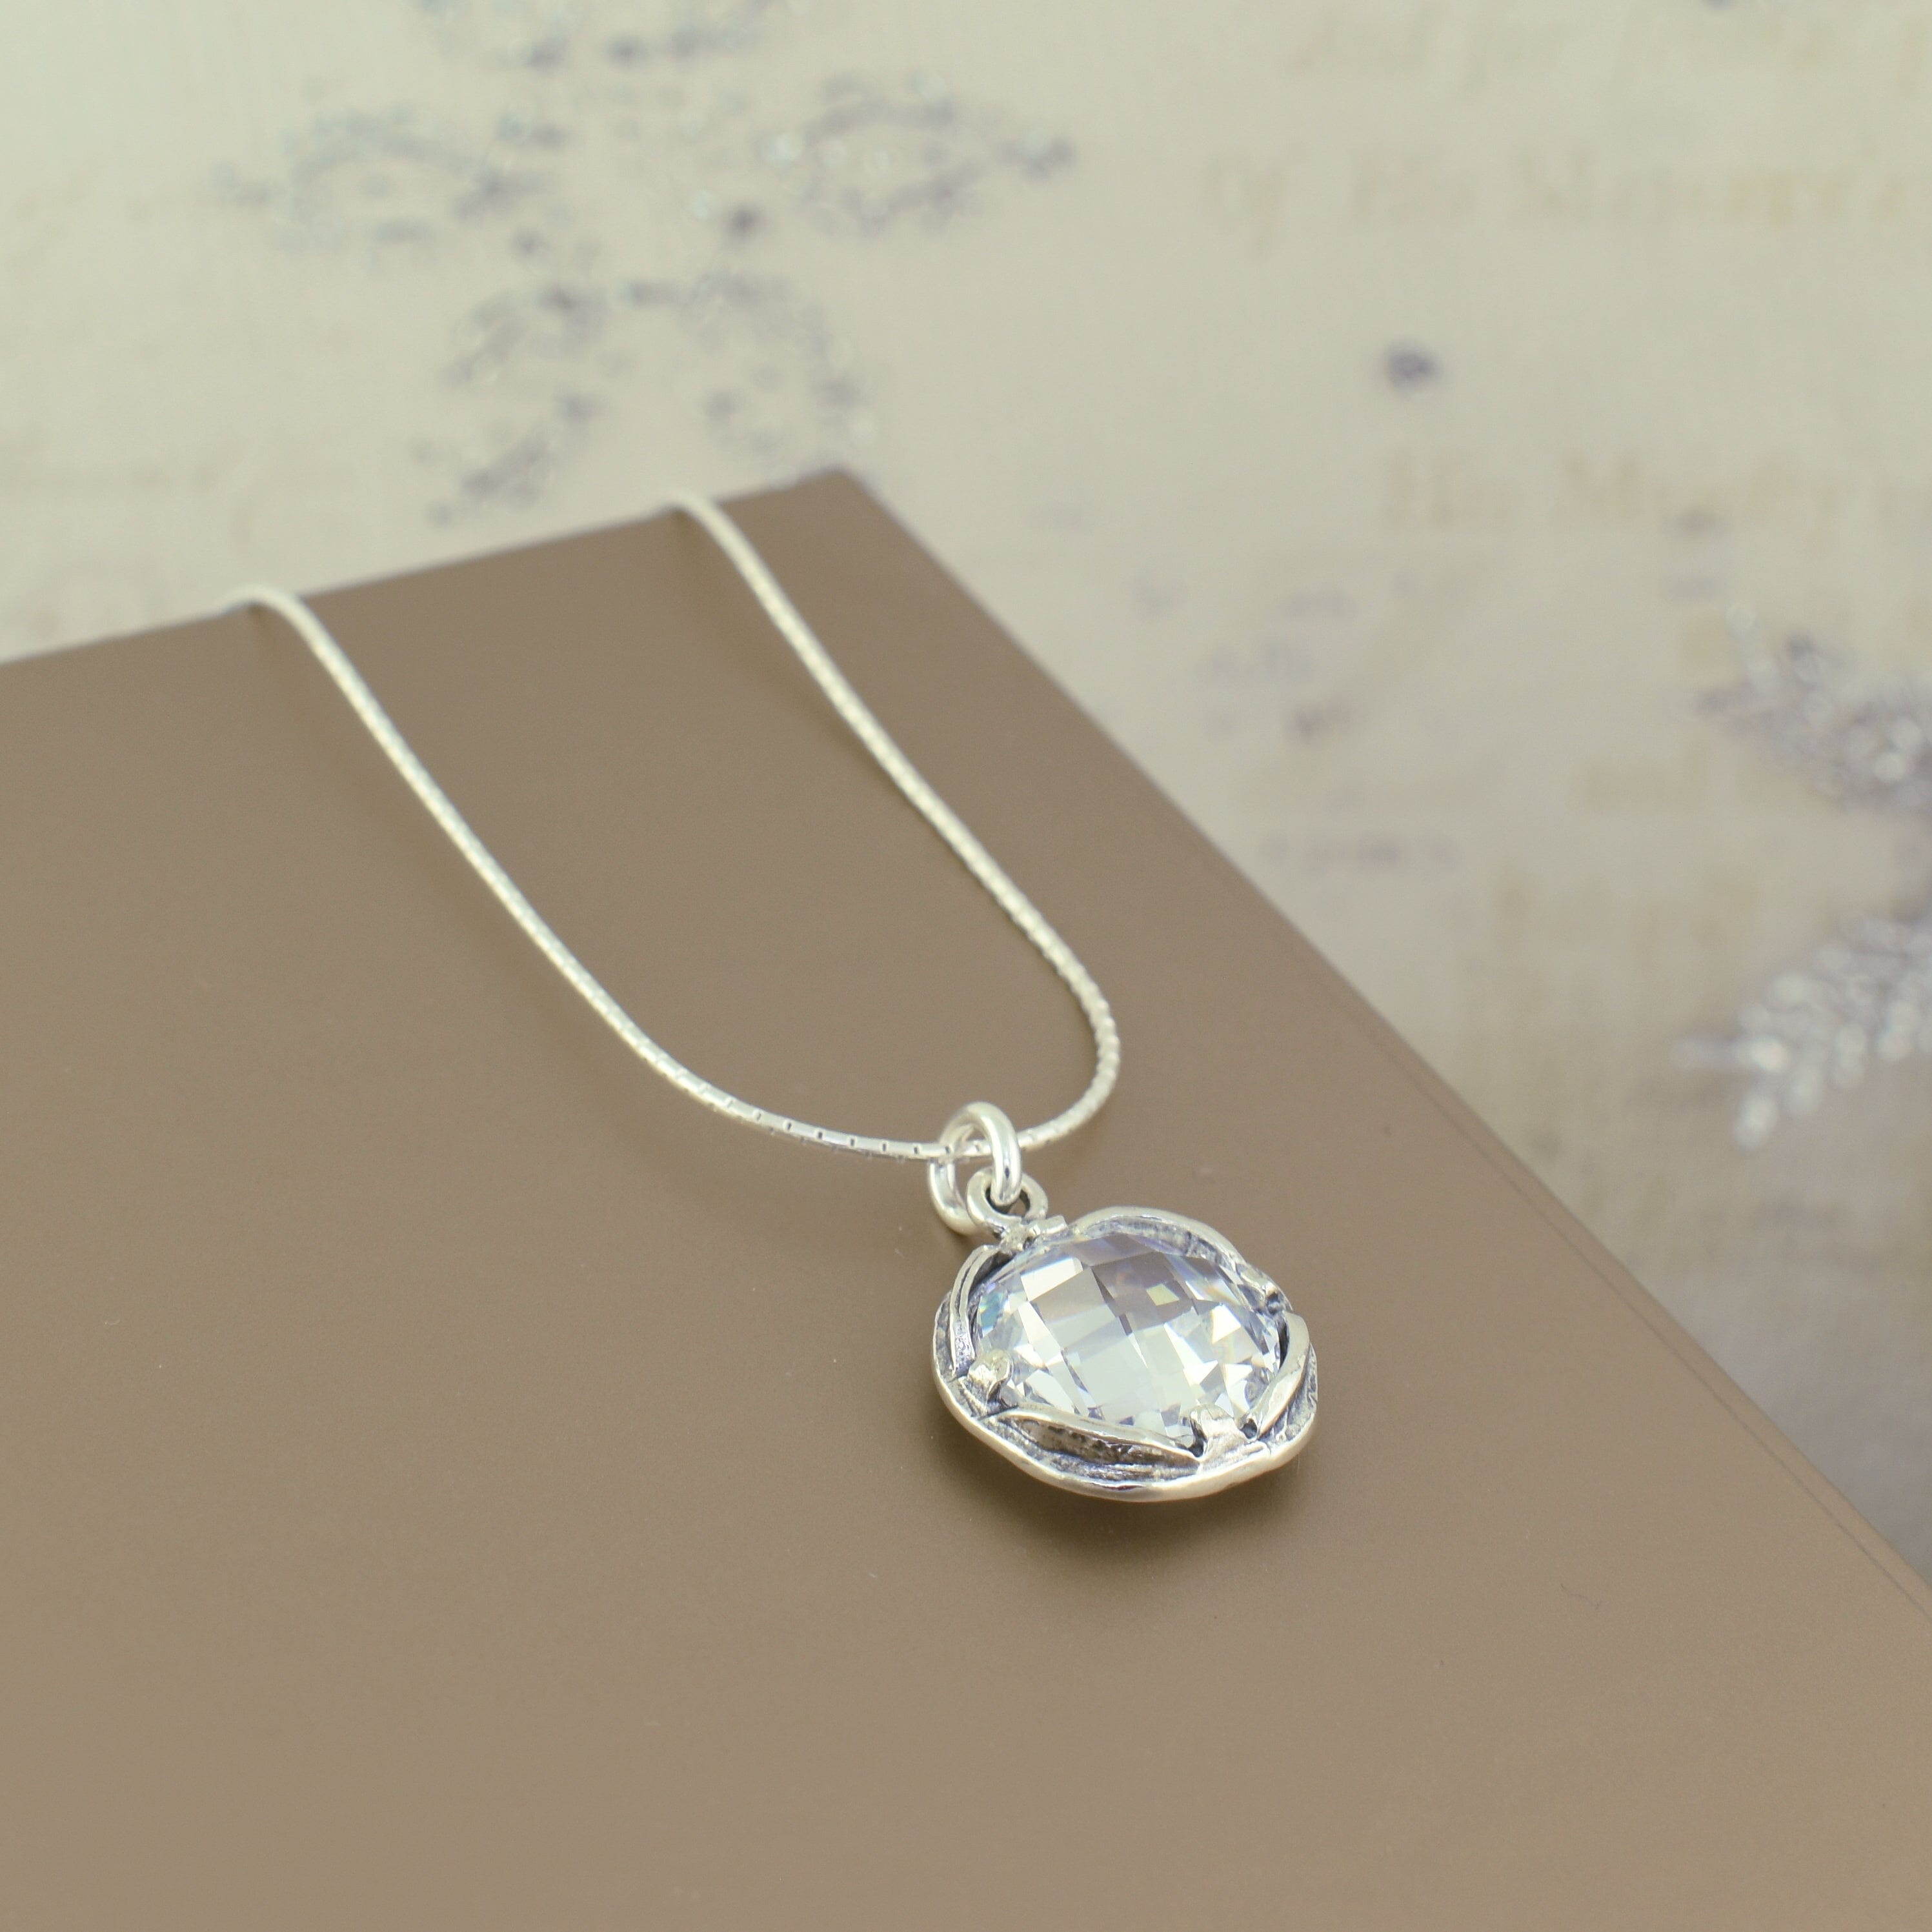 .925 sterling silver necklace with round CZ stone